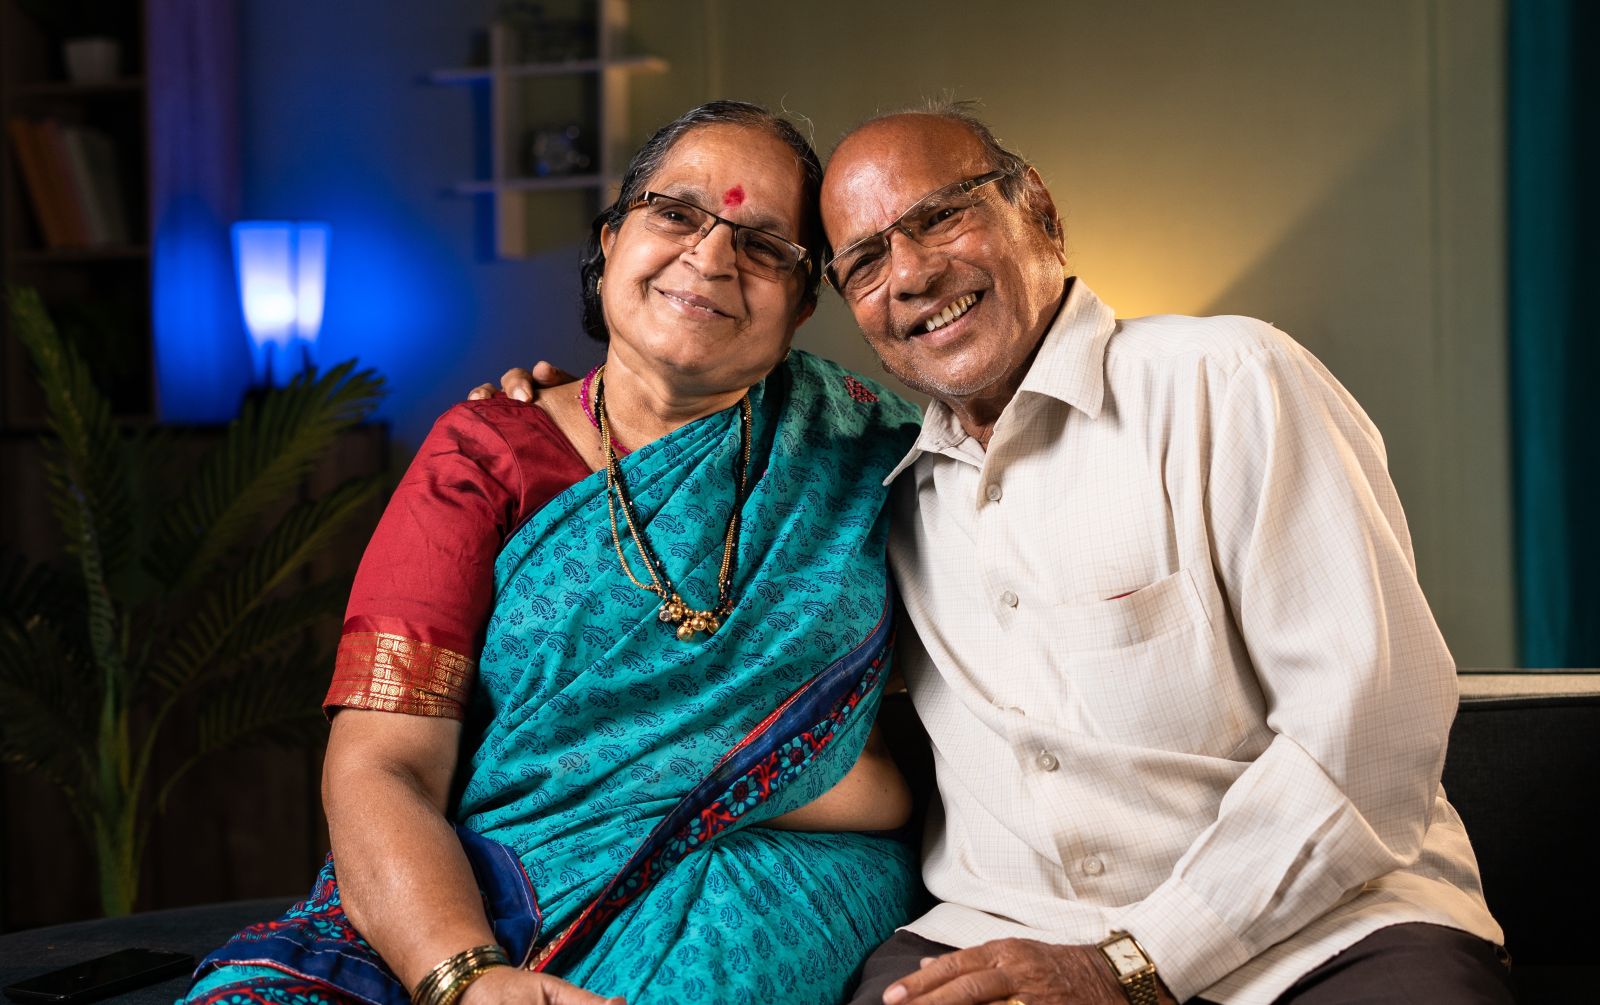 Portrait shot of a happy senior couple embracing each other by looking camera at home showing the concept of relationship, happiness and family bonding